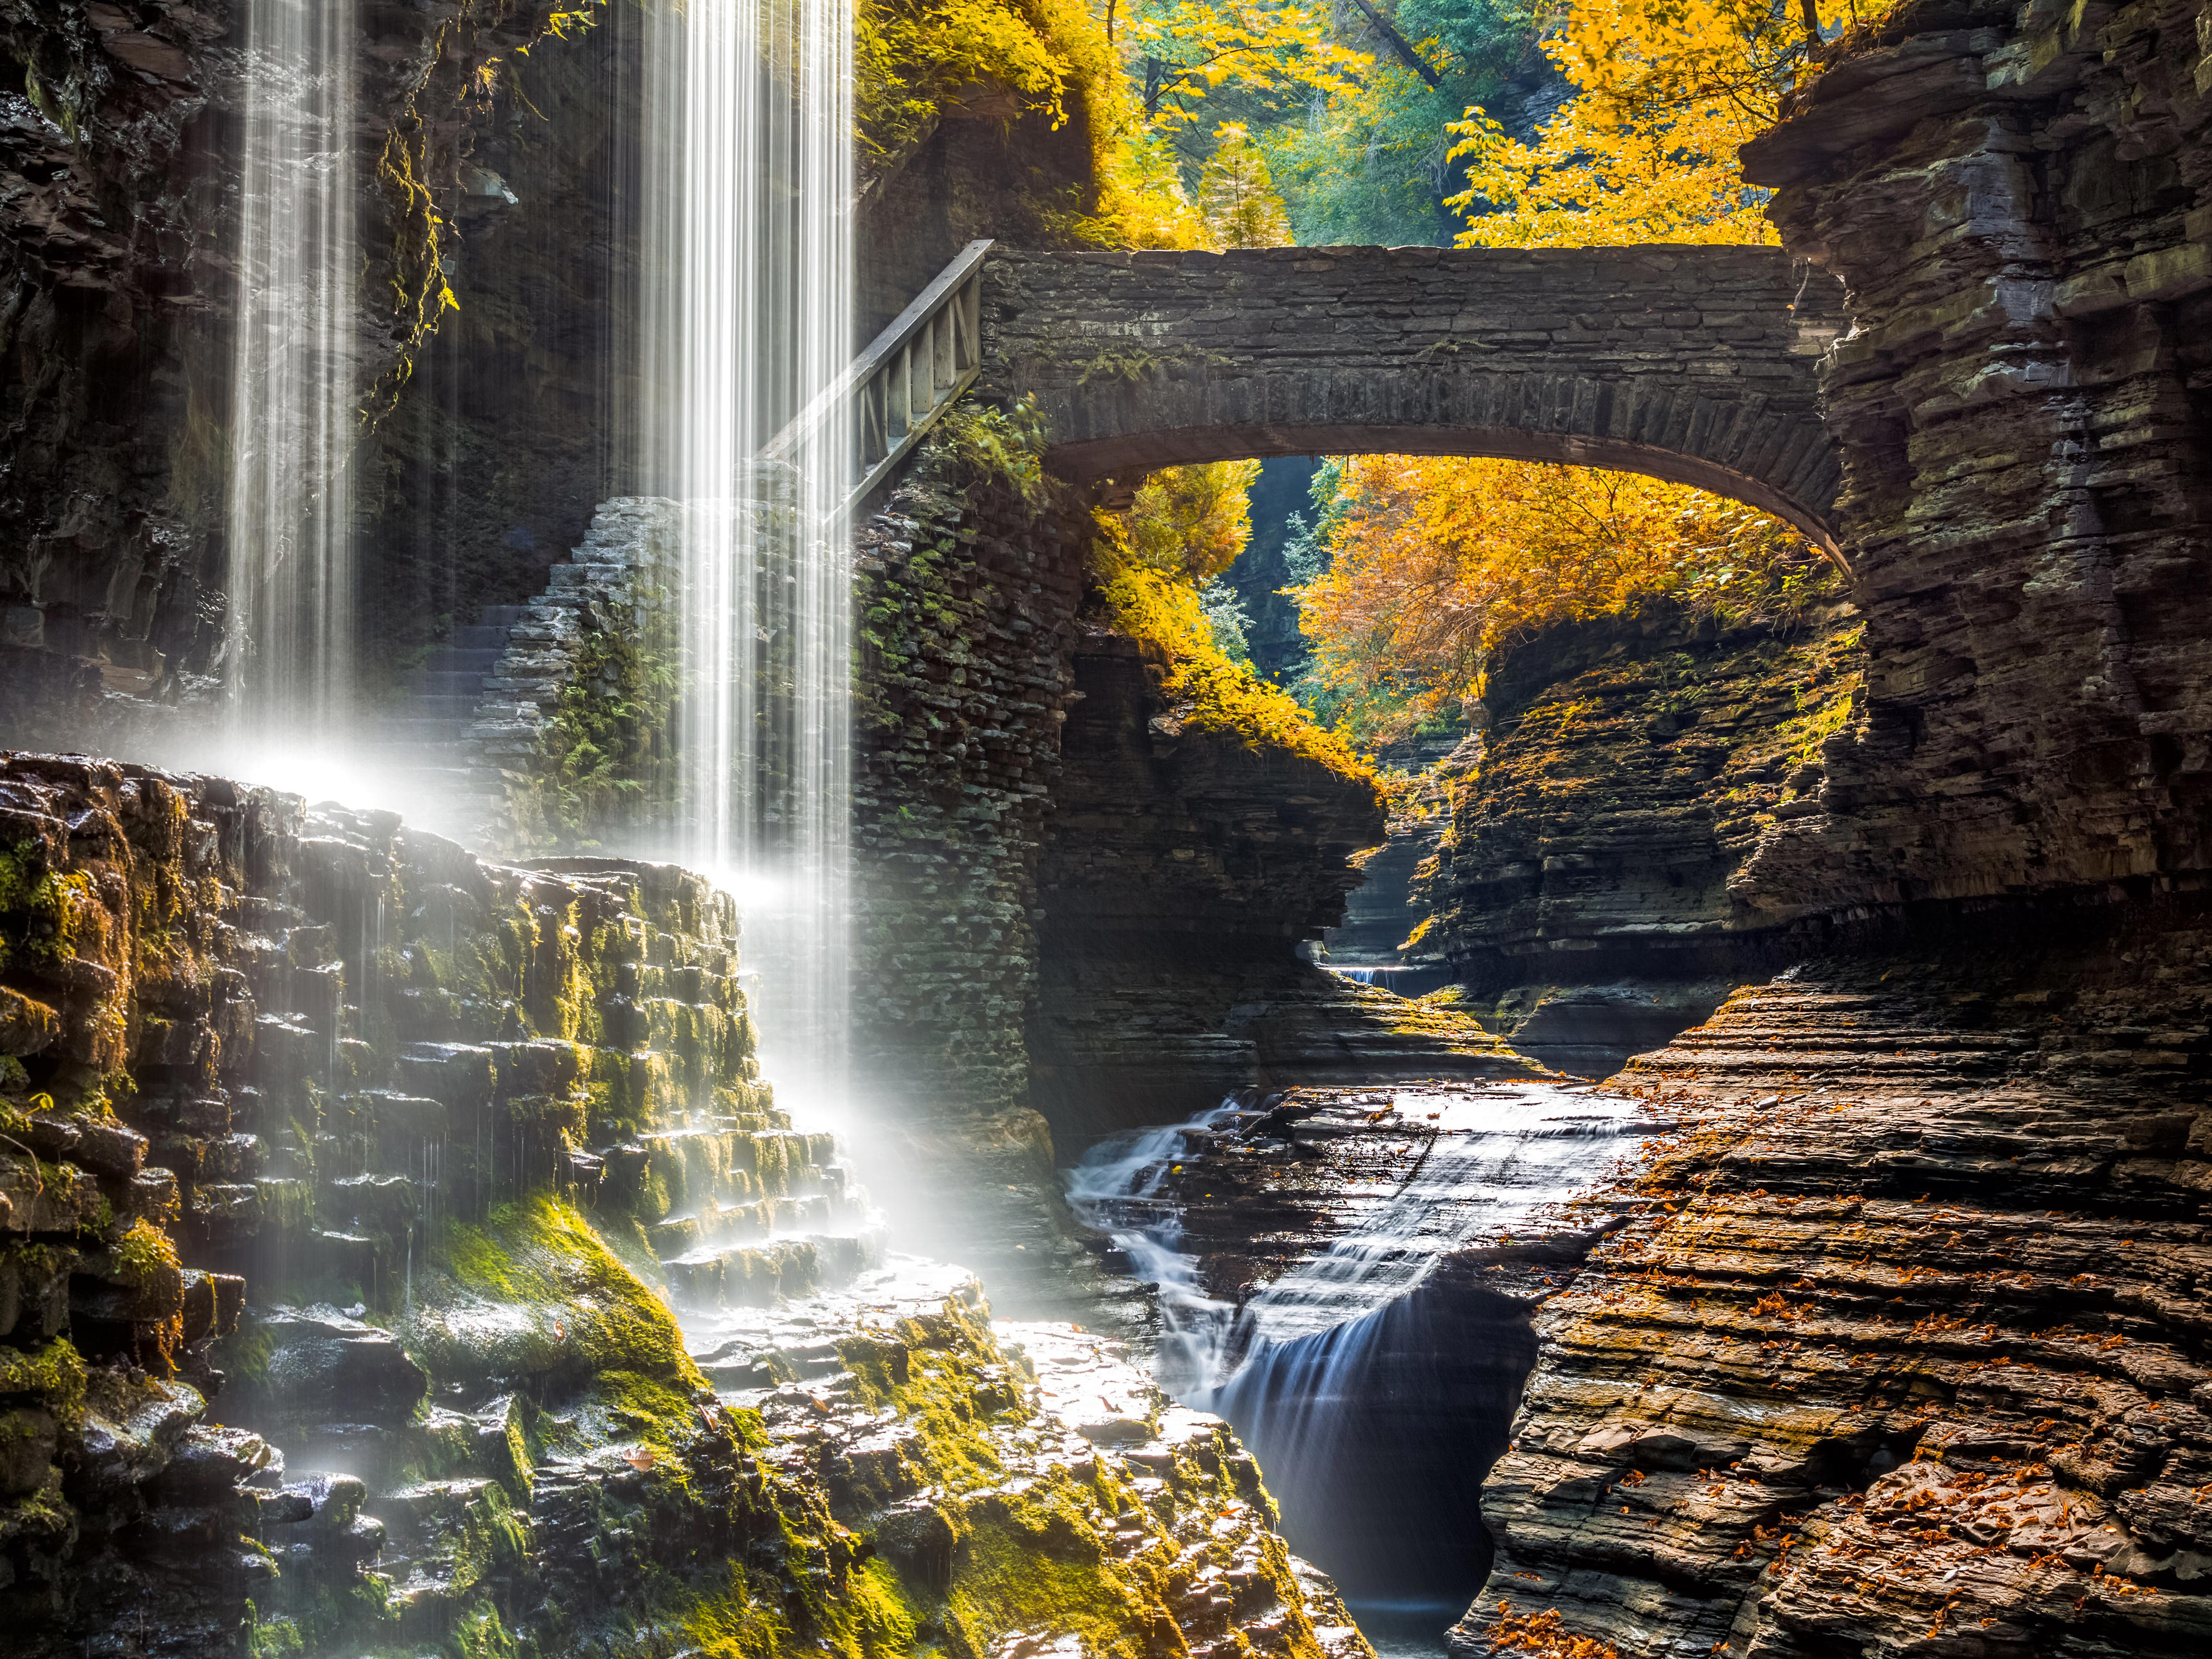 <p>The natural beauty of this region is truly spellbinding, and you can enjoy 19 cascading waterfalls along the trail. The <a href="https://parks.ny.gov/parks/142/">park offers an easy to moderate hike</a> with lots of stairs on most of the paths.</p><p><a href="https://www.insider.com/best-state-parks-to-visit-across-america">Watkins Glen State Park</a> was also selected from more than 6,000 state parks across the nation as a nominee in the <a href="http://www.10best.com/awards/travel/best-state-park/">USA Today Readers' Choice Poll for best state park in the United States</a> in 2015 and came in third place overall.</p>